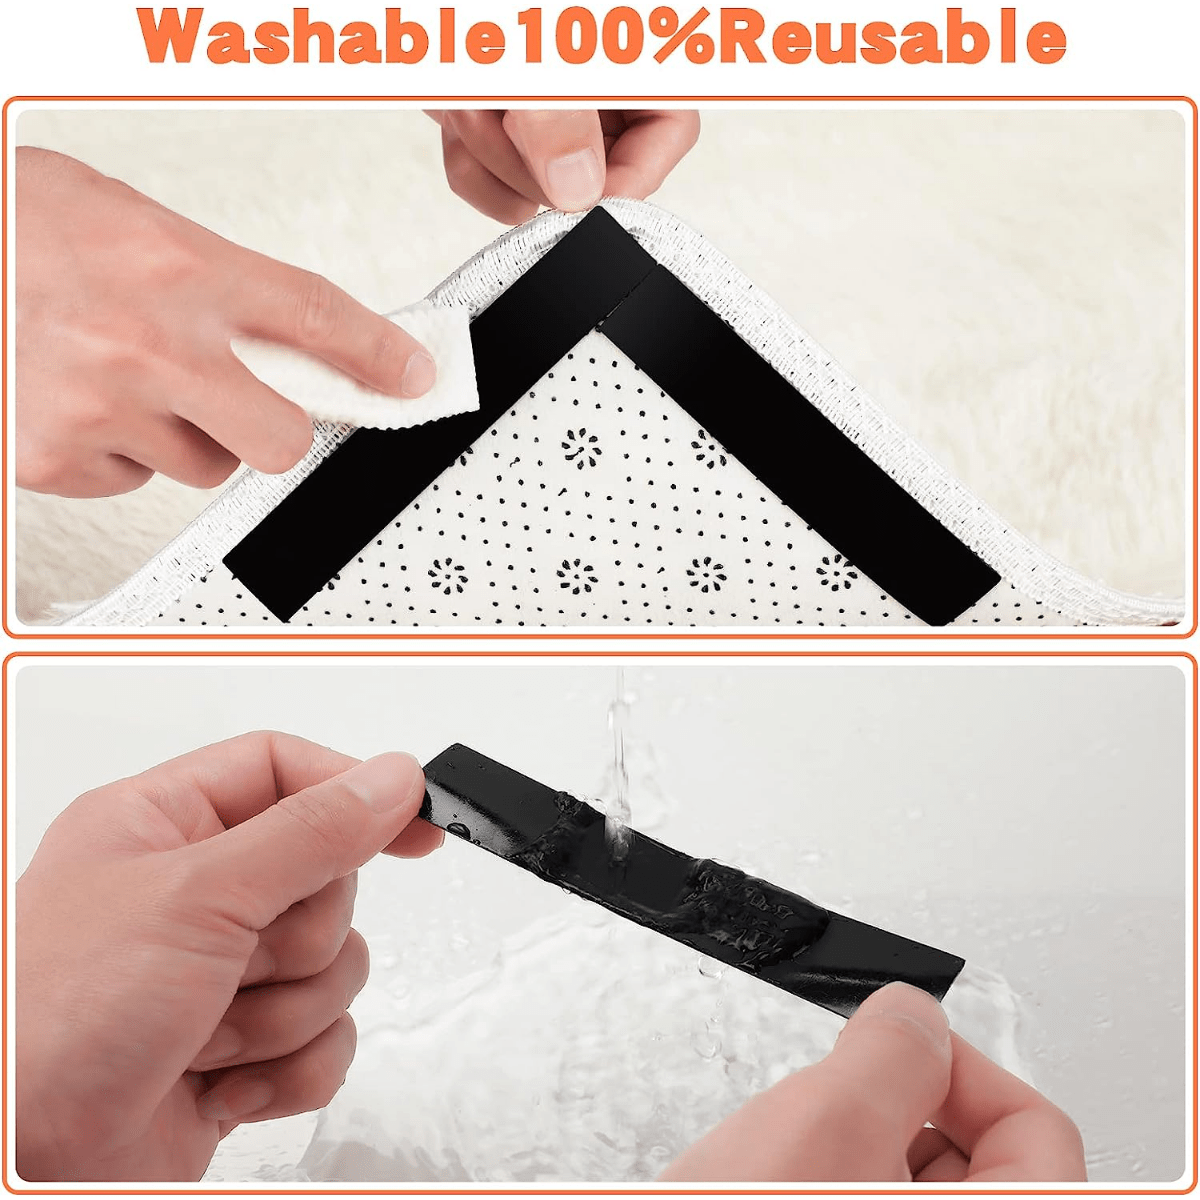 12 Pcs Rug Tape, Non Slip Rug Grippers, Reusable Washable Eco